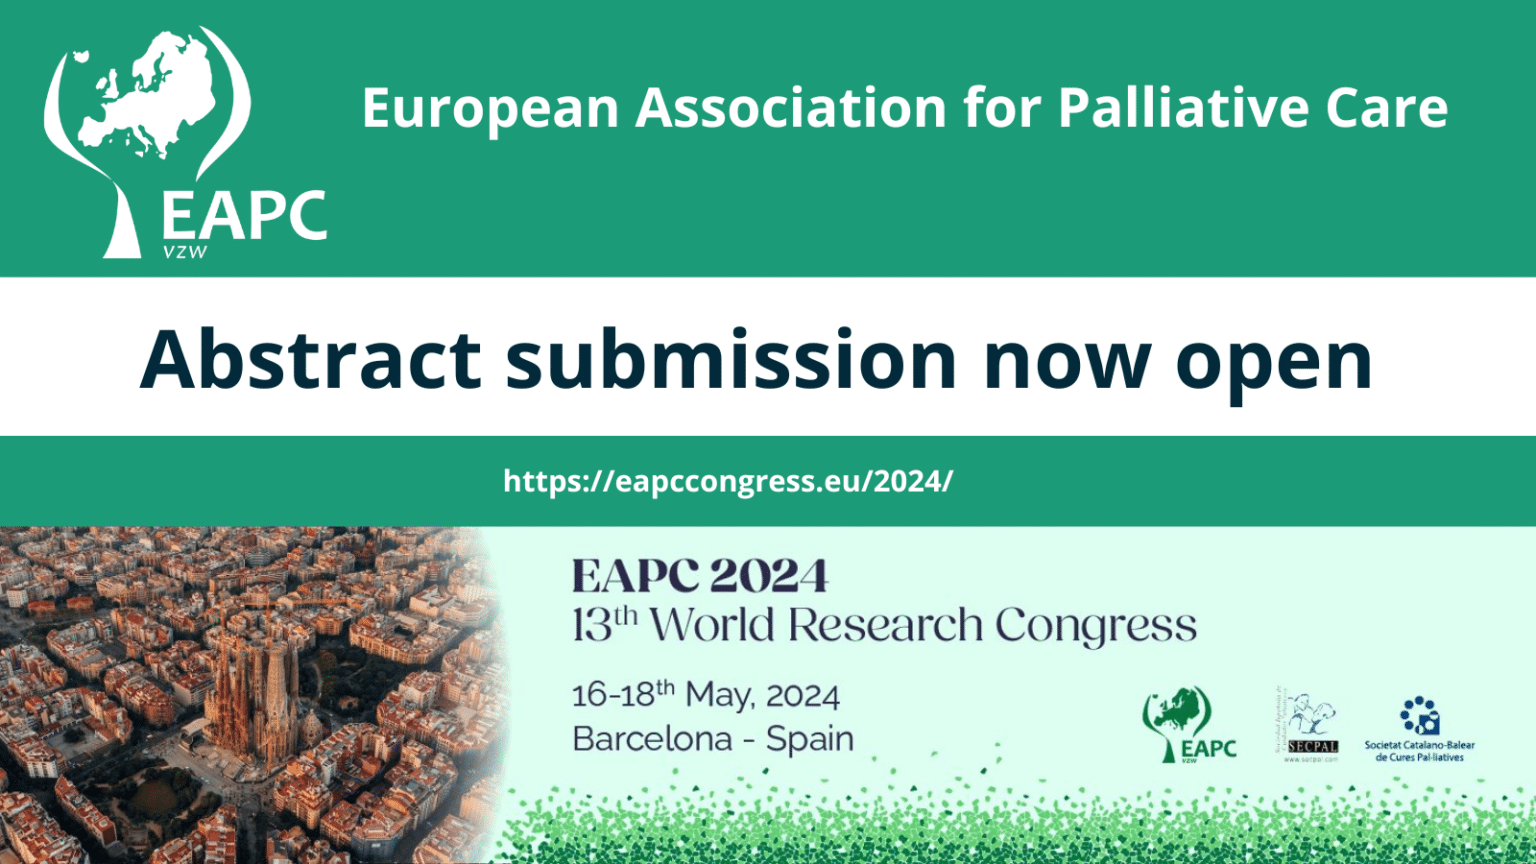 Abstract Submission now open for EAPC Congress 2024 EAPC